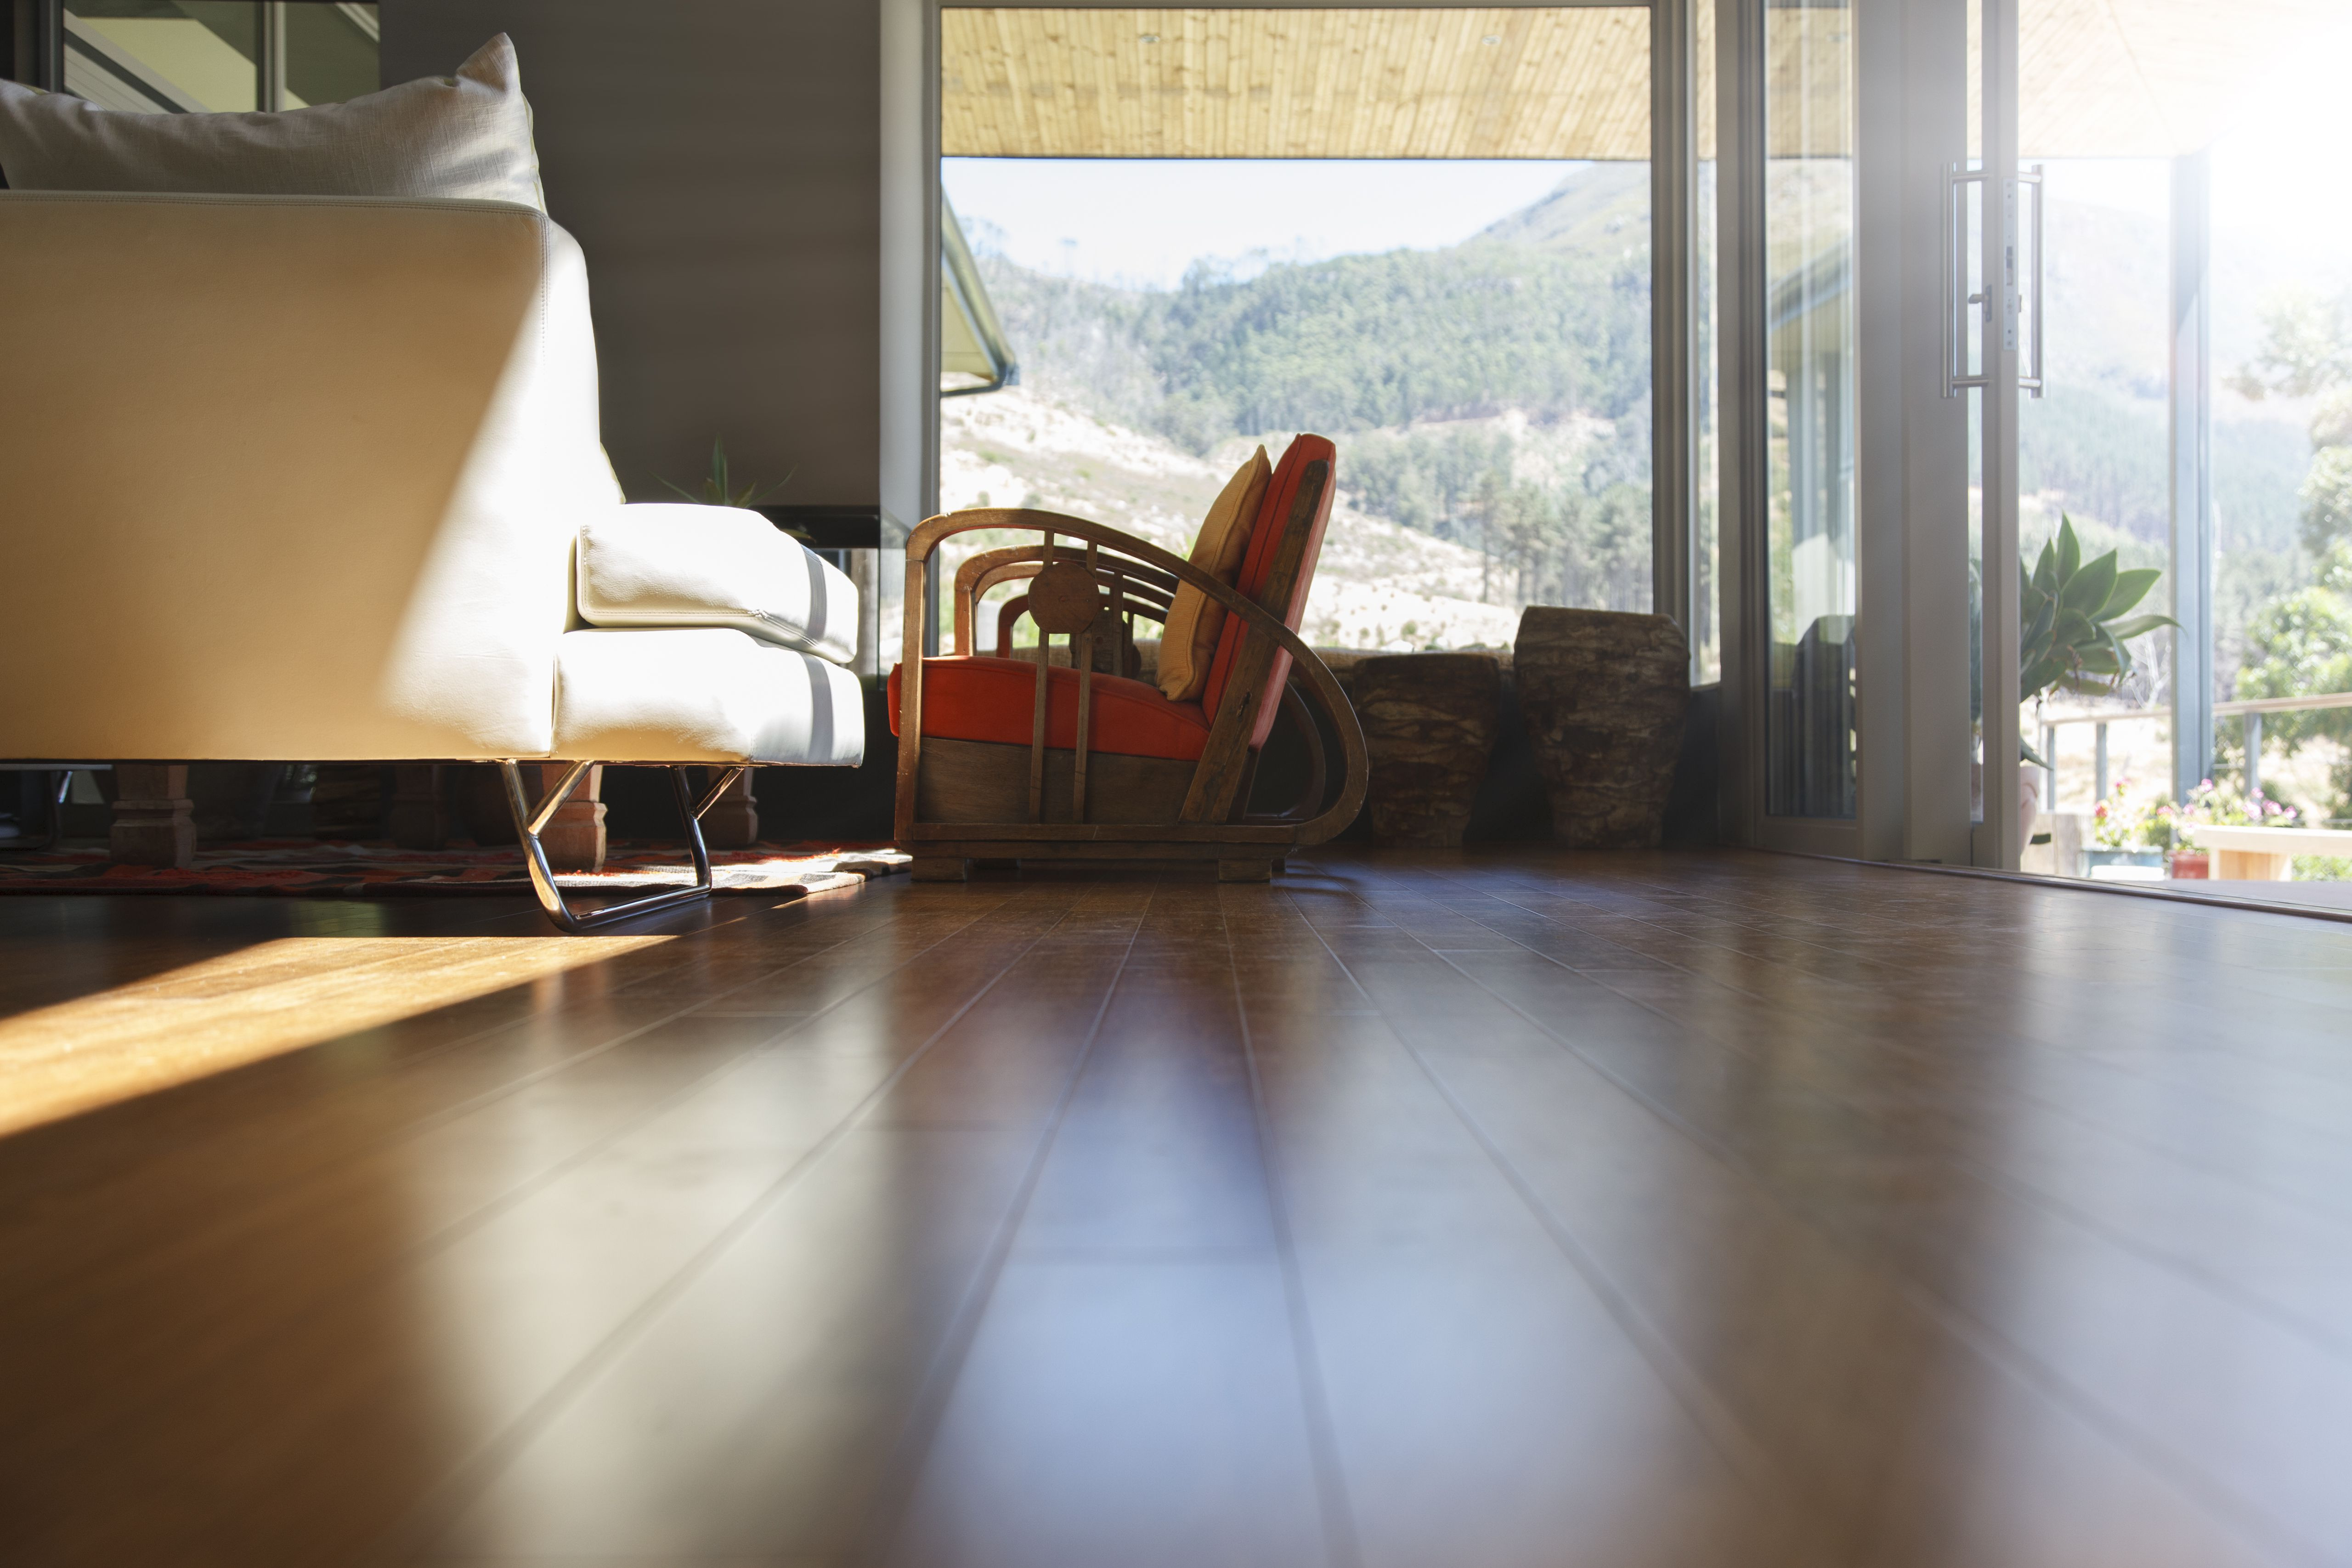 17 Great Hardwood Flooring Depot Reviews 2022 free download hardwood flooring depot reviews of vinyl plank flooring brands pros and cons and reviews throughout living room interior hard wood floor and sofa 525439899 57e95e215f9b586c359d5ab1